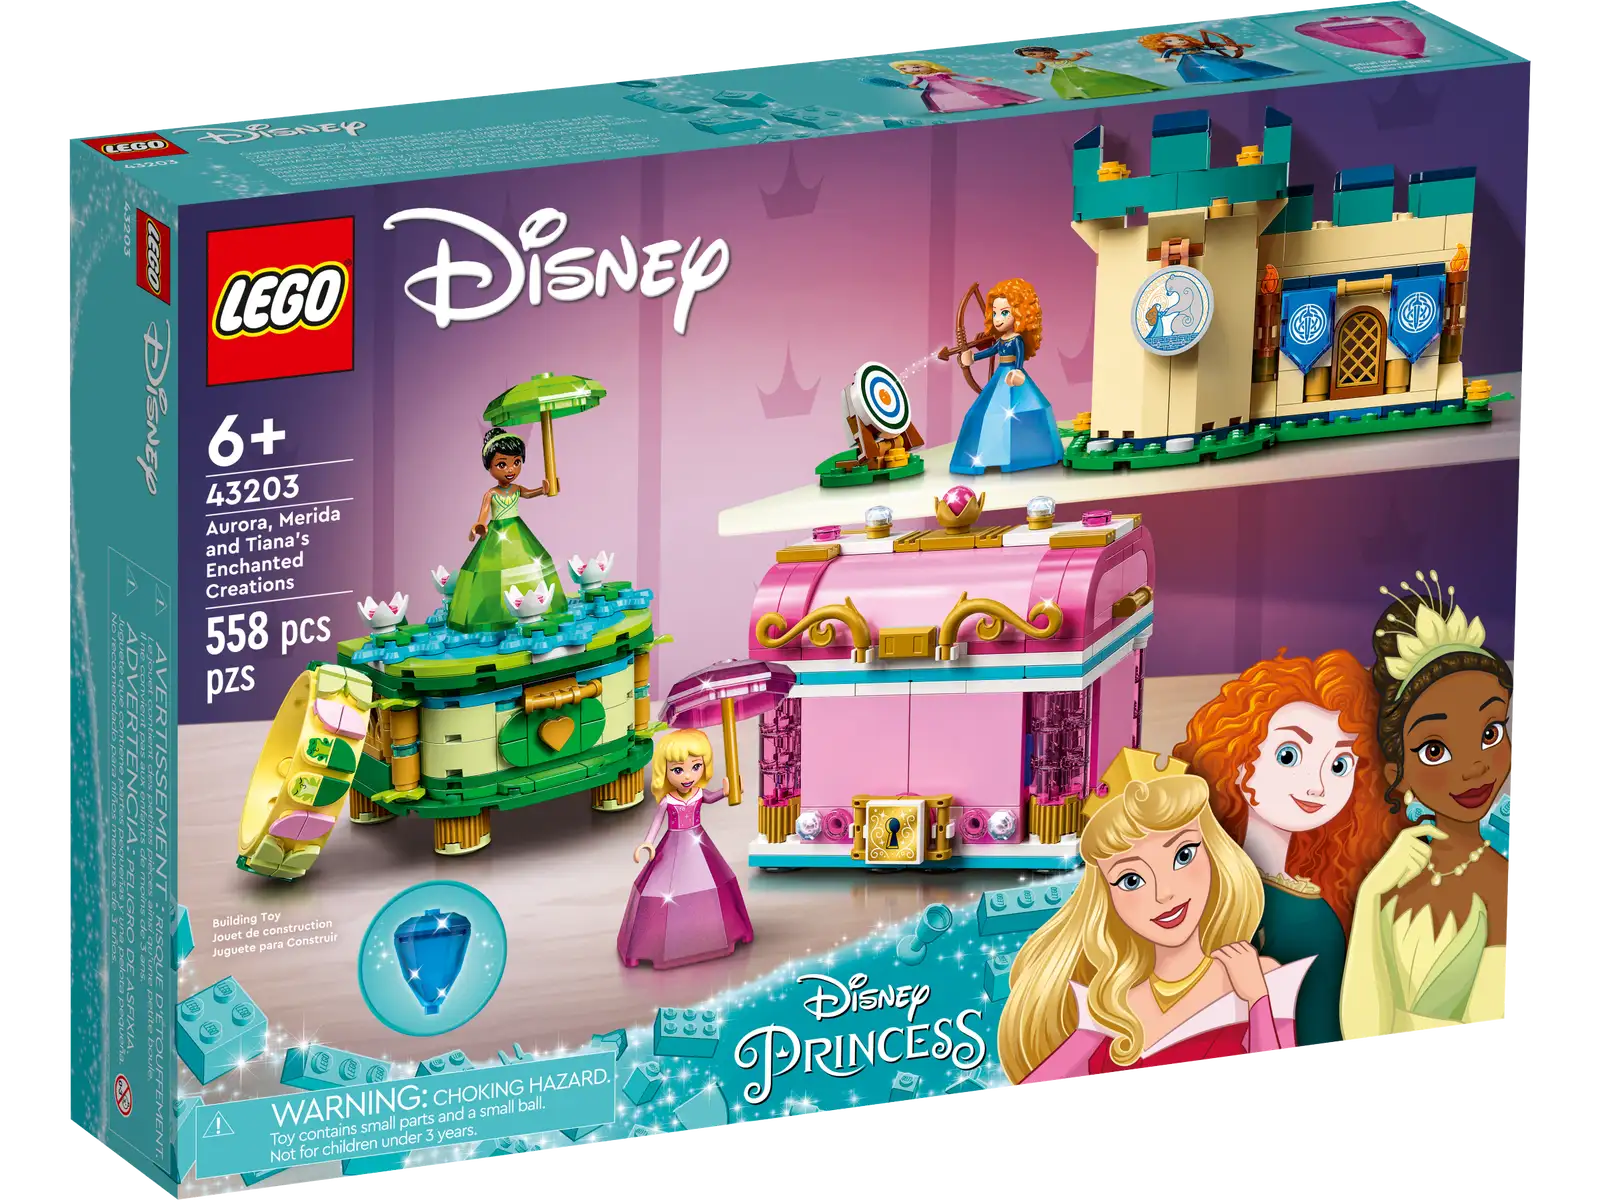 Open play possibilities await kids aged 6+ within this LEGO® ǀ Disney Aurora, Merida and Tiana’s Enchanted Creations (43203) set, including 3 buildable toys with extra functions, a LEGO DOTS bracelet with tiles, and 3 mini-doll figures with special ‘diamond’ dresses. Interactive digital building instructions to make building extra fun are available in the free LEGO Building Instructions app, with intuitive tools to help kids visualize the model. Learn and play The builds grow children’s confidence and spark imagination and creativity as they replay movie-based scenes or devise their own, then use the builds to hold jewelry, pencils or other treasures. The set is great on its own or can be combined with other LEGO ǀ Disney sets (sold separately) for extended play. Well-known characters and scenes This fun set gets kids playing quickly with Disney’s Aurora and Tiana, plus Disney and Pixar’s Merida, mini-doll figures, and will be a gift that everyone will admire during and after playtime. Endless princess play – Give any child a gift to wow the playground with this LEGO® ǀ Disney Aurora, Merida and Tiana’s Enchanted Creations 43203 set. The fun starts with building and doesn’t stop What’s in the set? – This 558-piece set includes buildable items with functions for each princess, a transforming ‘diamond’ dress designed to store a mini-doll figure inside and lots of story starters Well-known characters – Featuring Disney’s Aurora and Tiana, plus Disney and Pixar’s Merida, this set can be combined with other Disney sets (sold separately) or used for open-ended play on its own Inventive gift for ages 6+ – Kids will love this set full of creative possibilities, inspired by 3 beloved Disney movies, making it a fun gift for kids wanting to join the hottest trends Extended experience – With Merida’s castle measuring over 3.5 in. (9 cm) high, 5.5 in. (14 cm) wide and 3.5 in. (9 cm) deep, this set is easy for kids to take out for playdates, over and over Interactive digital building – Using the LEGO® Building Instructions app, builders can zoom, rotate and visualize a digital version of their model as they build Collectible fun – The LEGO® ǀ Disney Diamond Dress Assortment offers kids and fans a range of sets, with 5 different princesses and their ‘diamond’ dresses spread across the collection Important life skills – With detailed mini-doll figures and usable builds, this Disney Princess buildable set encourages open creative play that helps build important life skills through fun Uncompromising quality – Ever since 1958, LEGO® components have met stringent industry standards to ensure they connect consistently Safety first – LEGO® components are dropped, heated, crushed, twisted and analyzed to make sure they meet rigorous global safety standards